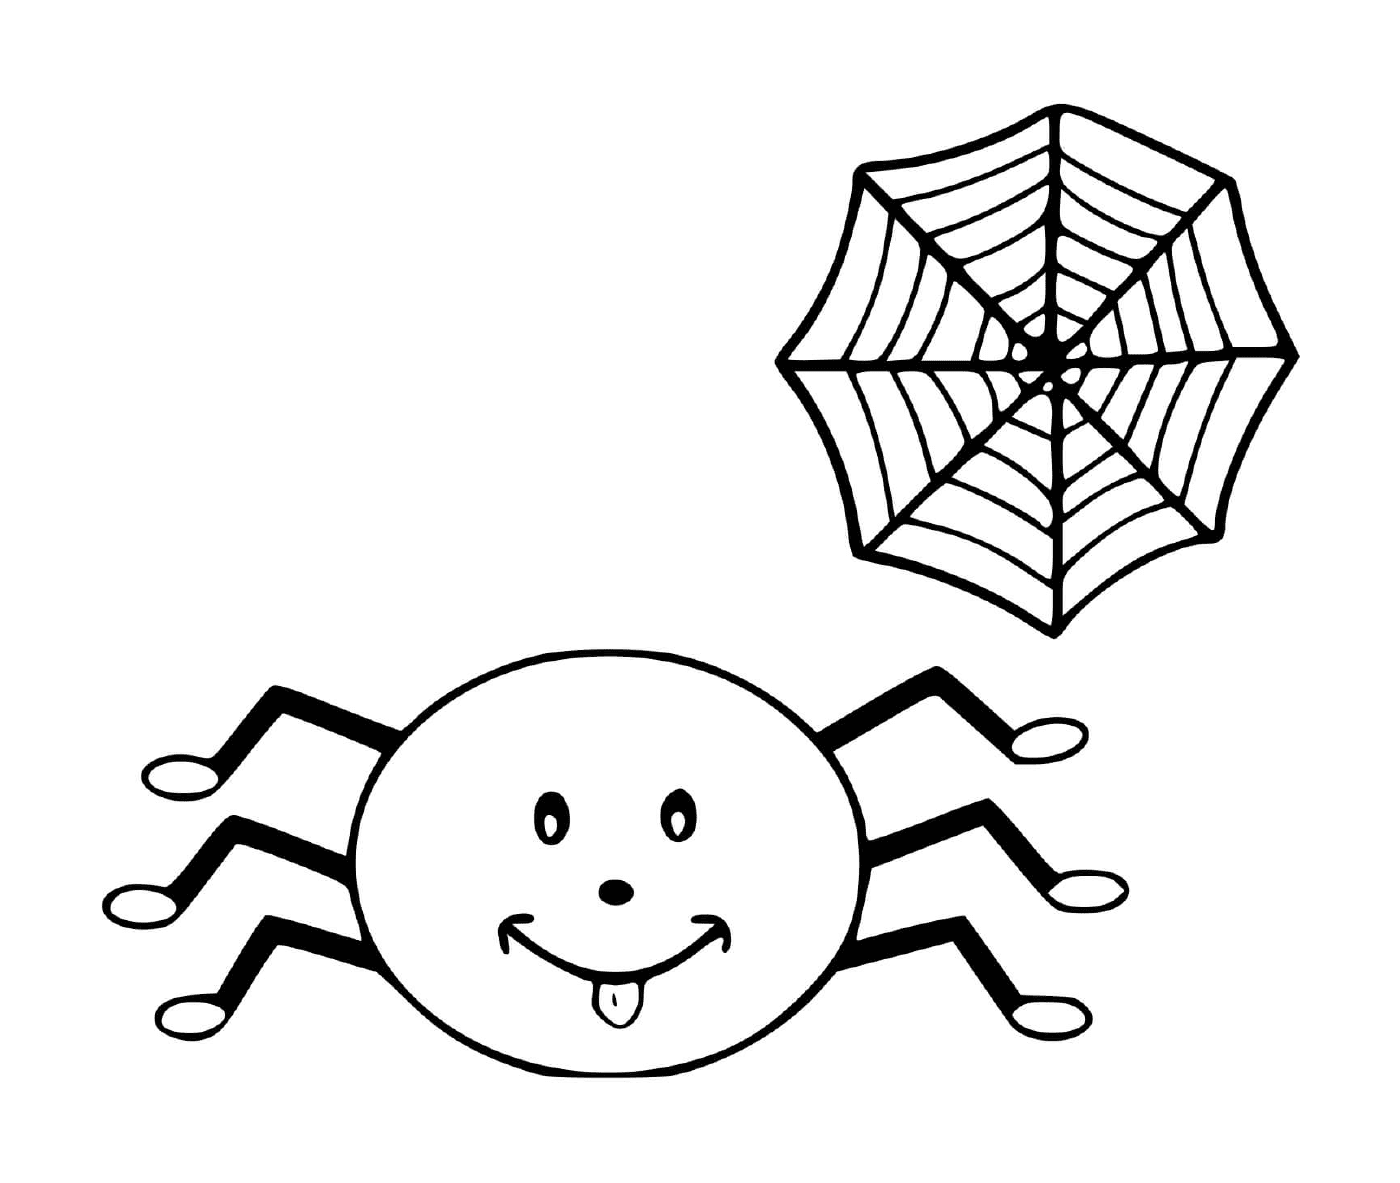  A spider and a web 